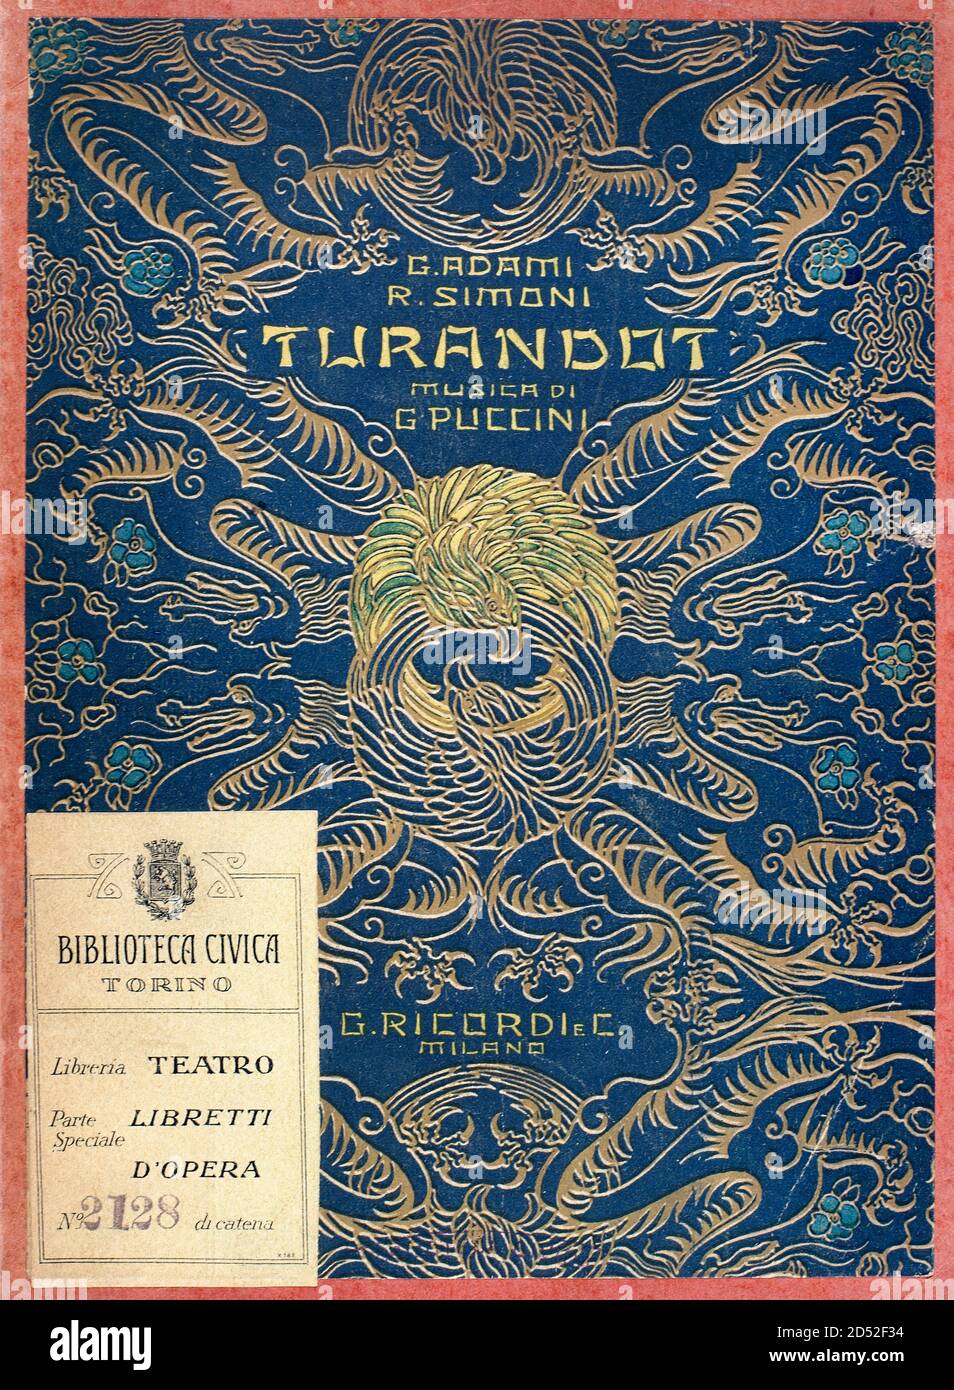 Giacomo Puccini (1858-1924). Italian composer. Puccini died before finishing his last opera, Turandot (libretto by Adami and Renato Simoni, based on the Italian writer Carlo GozziÕs fable of the same name), which was completed by Franco Alfano and produced posthumously in 1926. The first performance was held at the Teatro alla Scala in Milan on 25 April 1926 and conducted by Arturo Toscanini. Cover of the libretto for the opera 'Turandot'. Opera in three acts. Biblioteche civiche torinesi. Musical library. Turin, Italy. Stock Photo